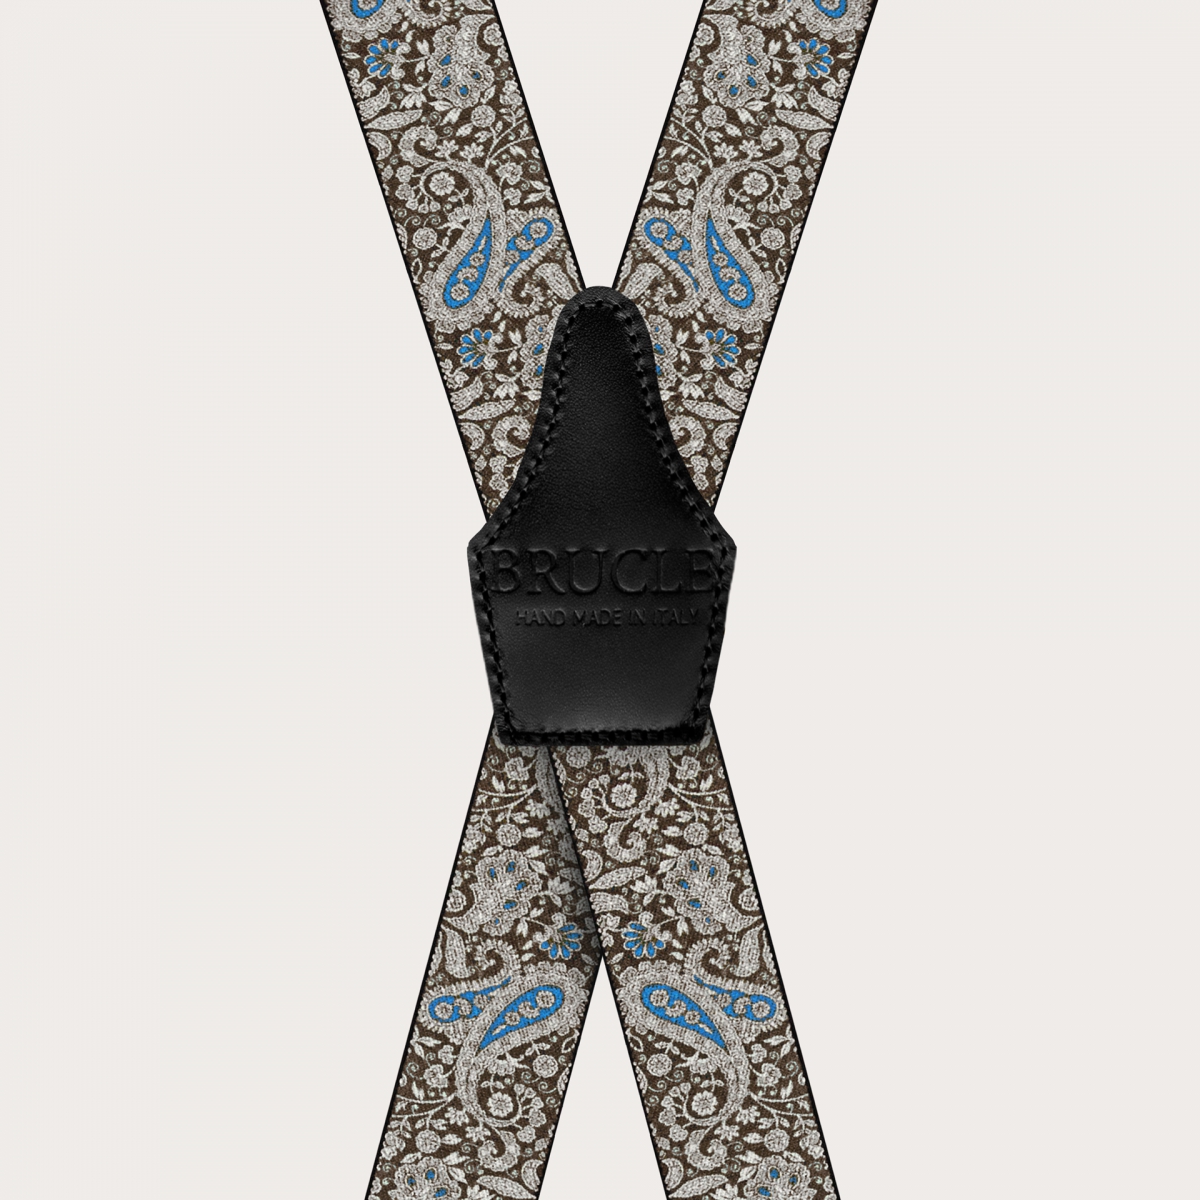 BRUCLE X-shaped suspenders with clips in brown and blue cashmere pattern